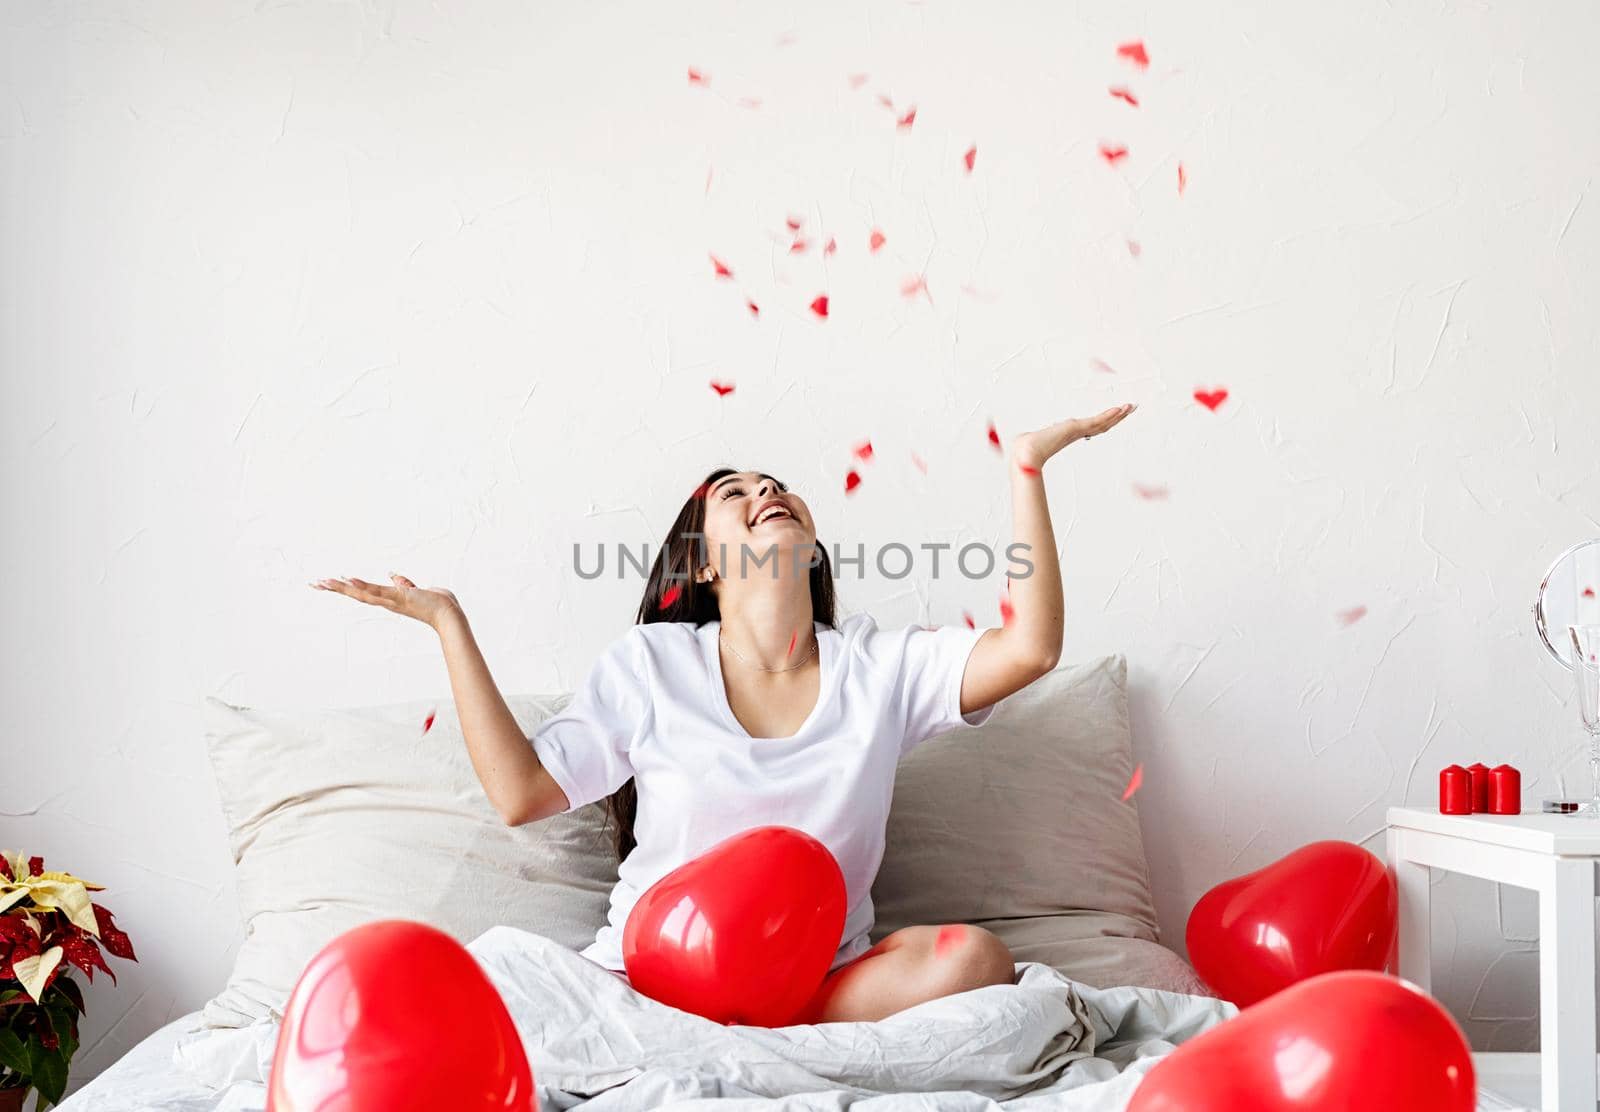 Valentine's Day. Sleeping. Young happy brunette woman sitting in the bed with red heart shaped balloons throwing confetti in the air